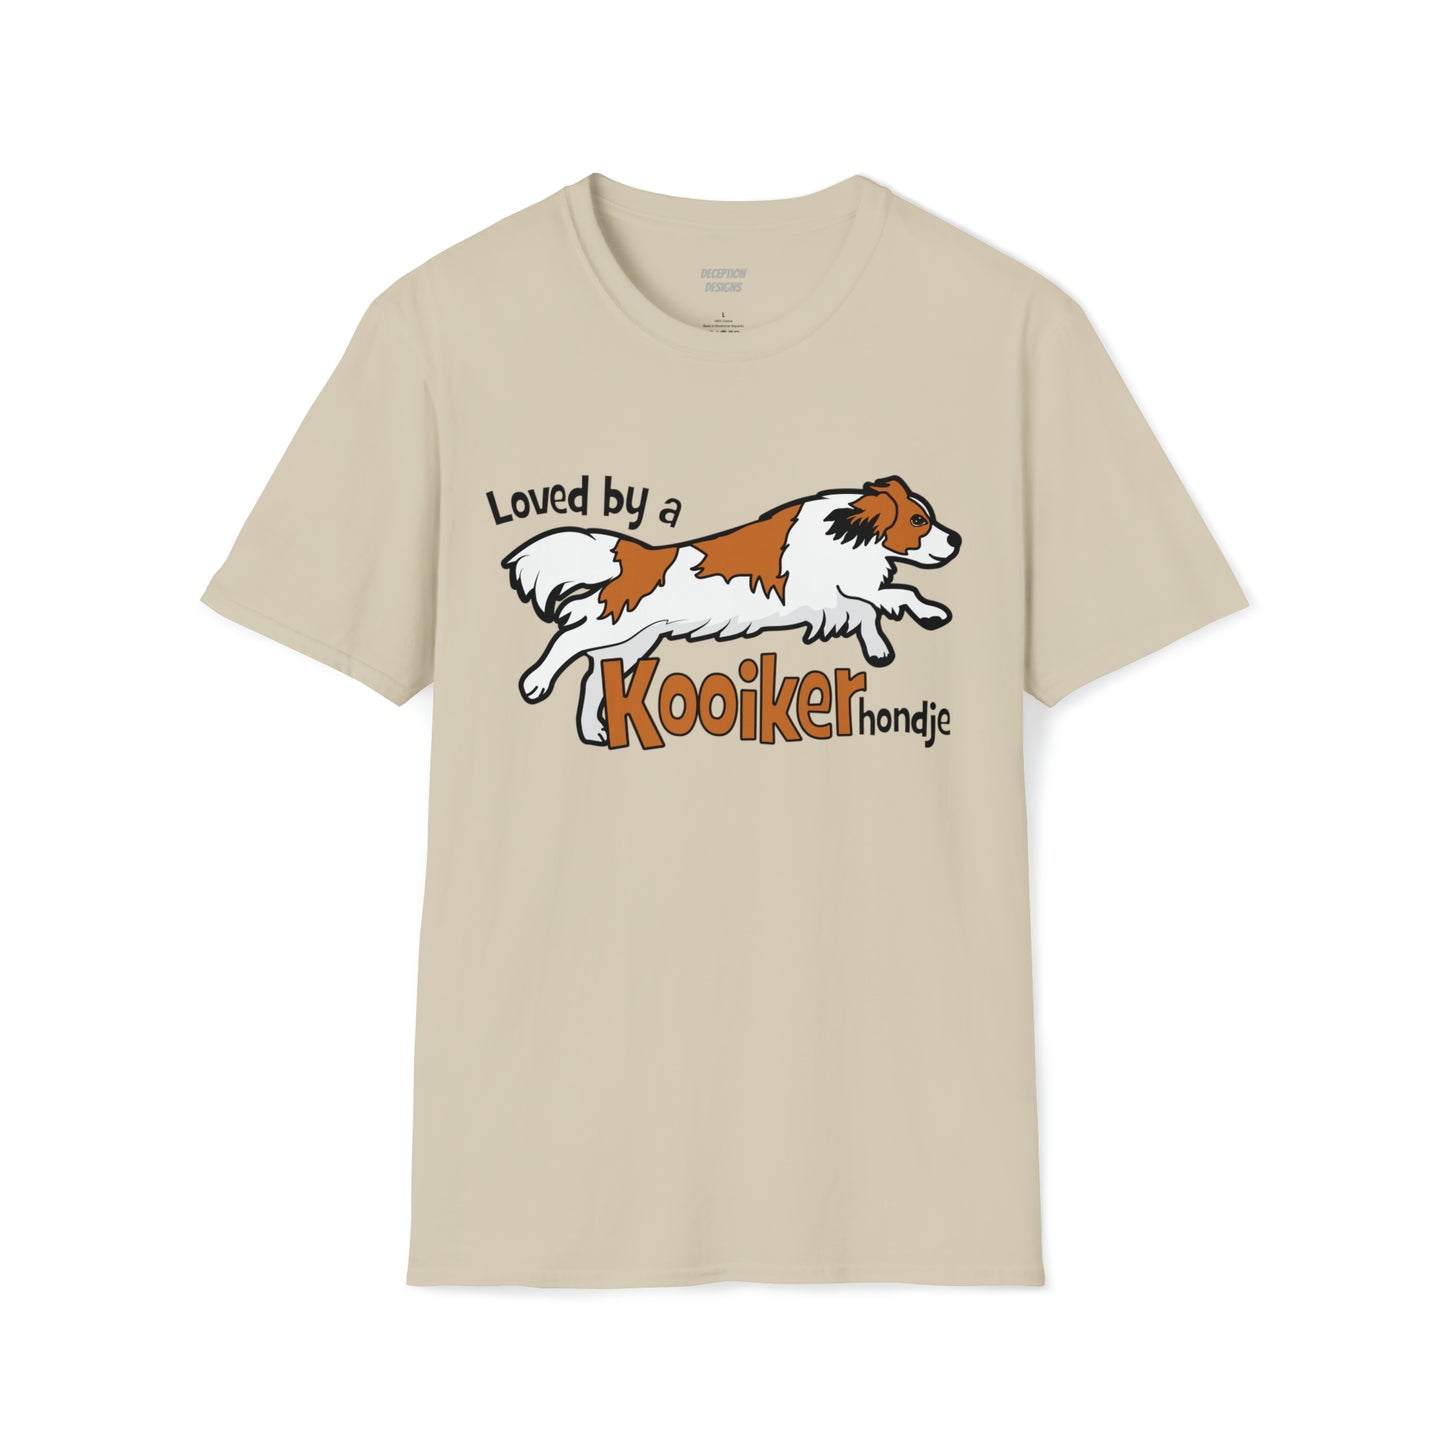 LOVED BY A KOOIKER 2 Unisex Softstyle T-Shirt